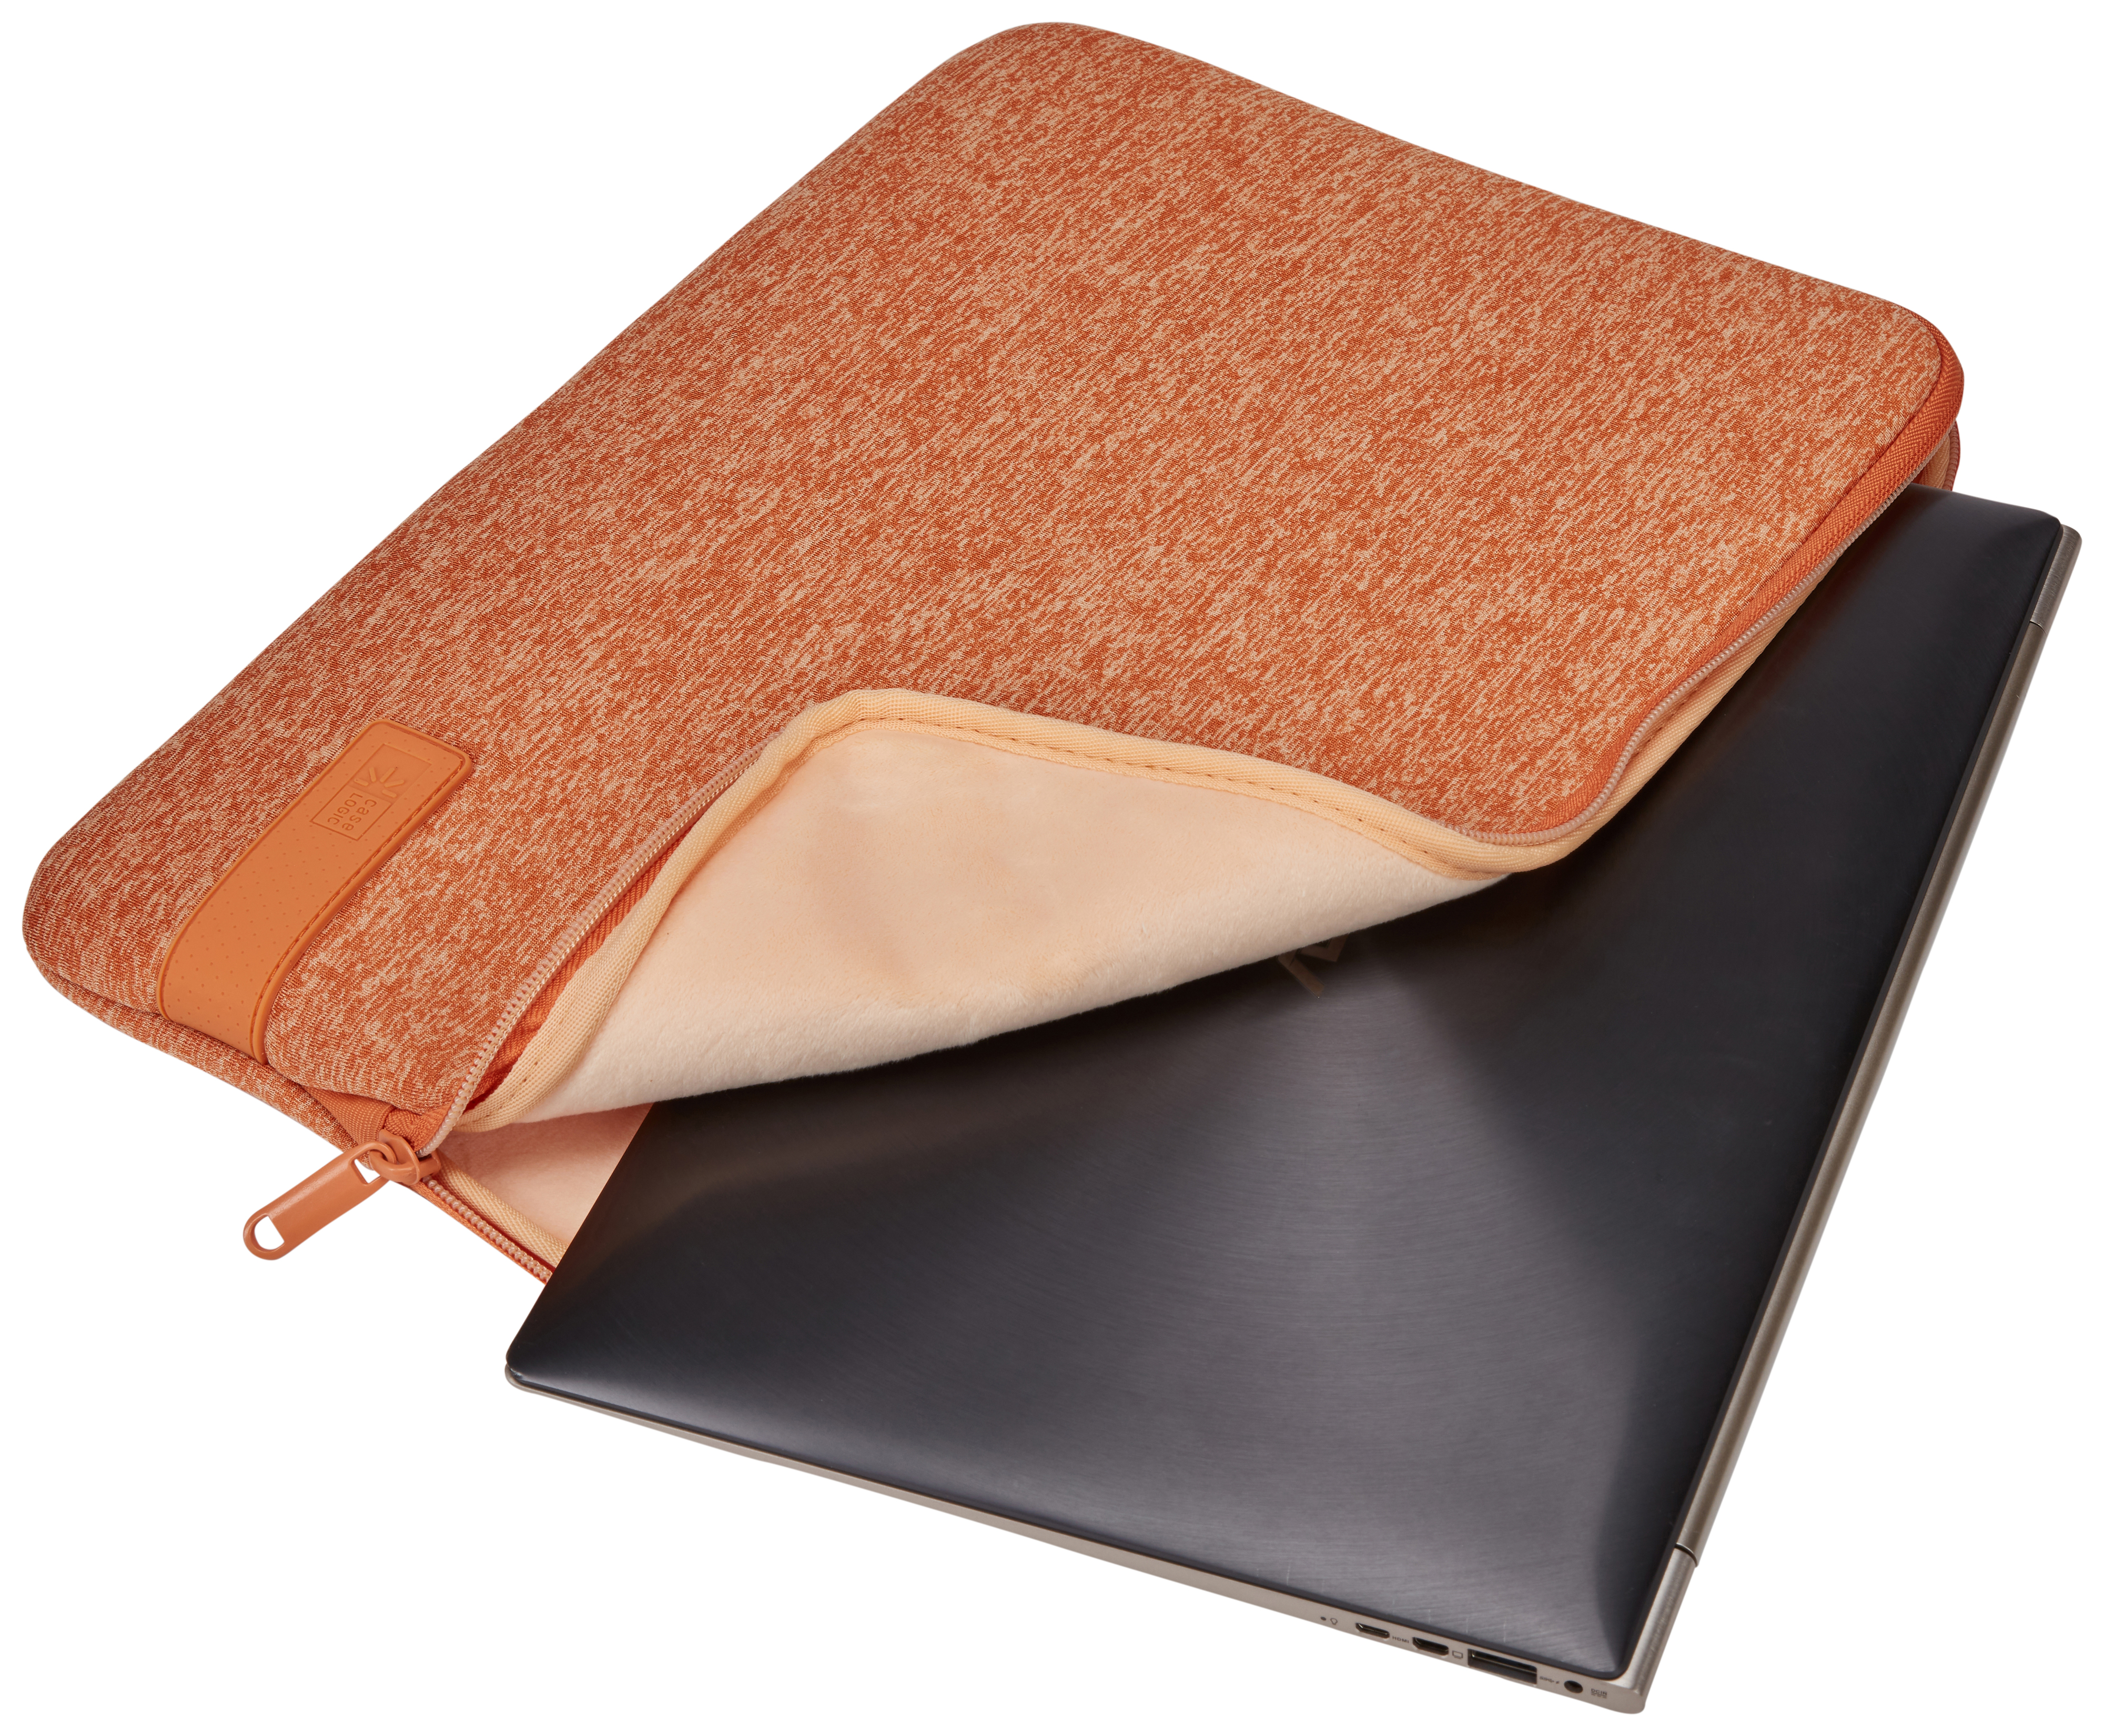 Sleeve Notebook LOGIC Universal Sleeve für Gold/Apricot Coral Polyester, Reflect CASE